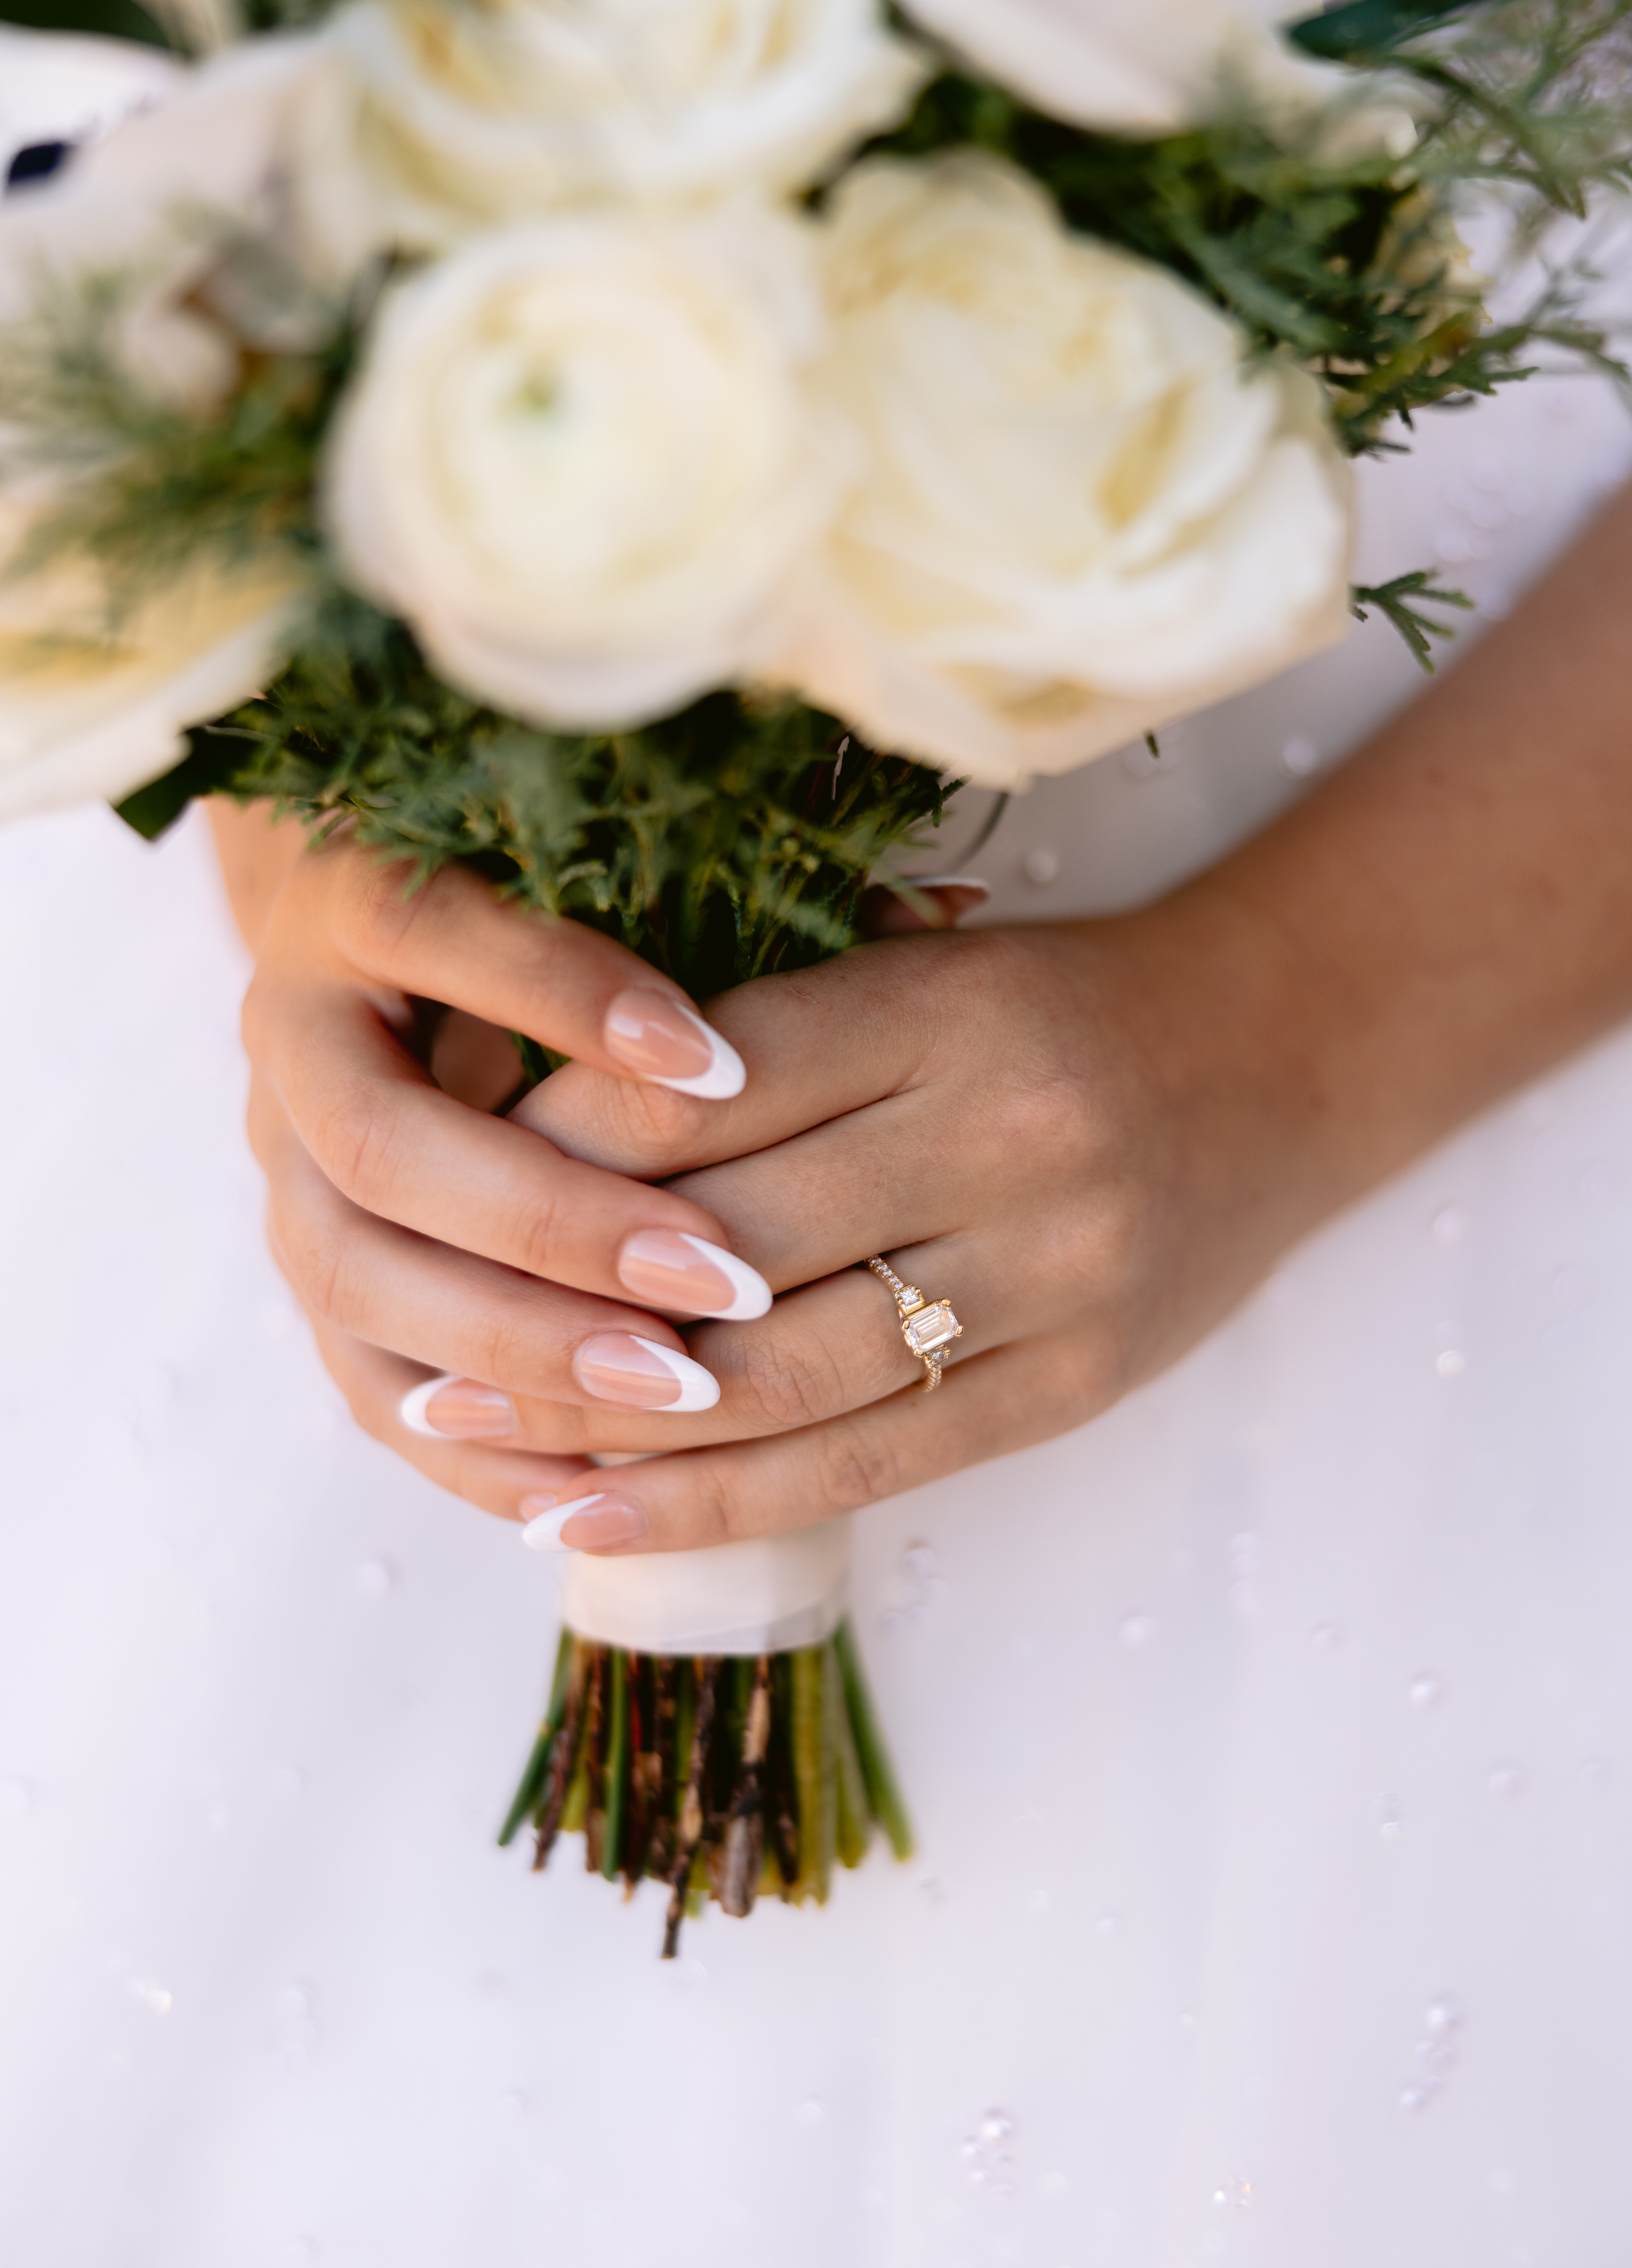 close up of wedding ring, wedding bouquet, wedding photography details